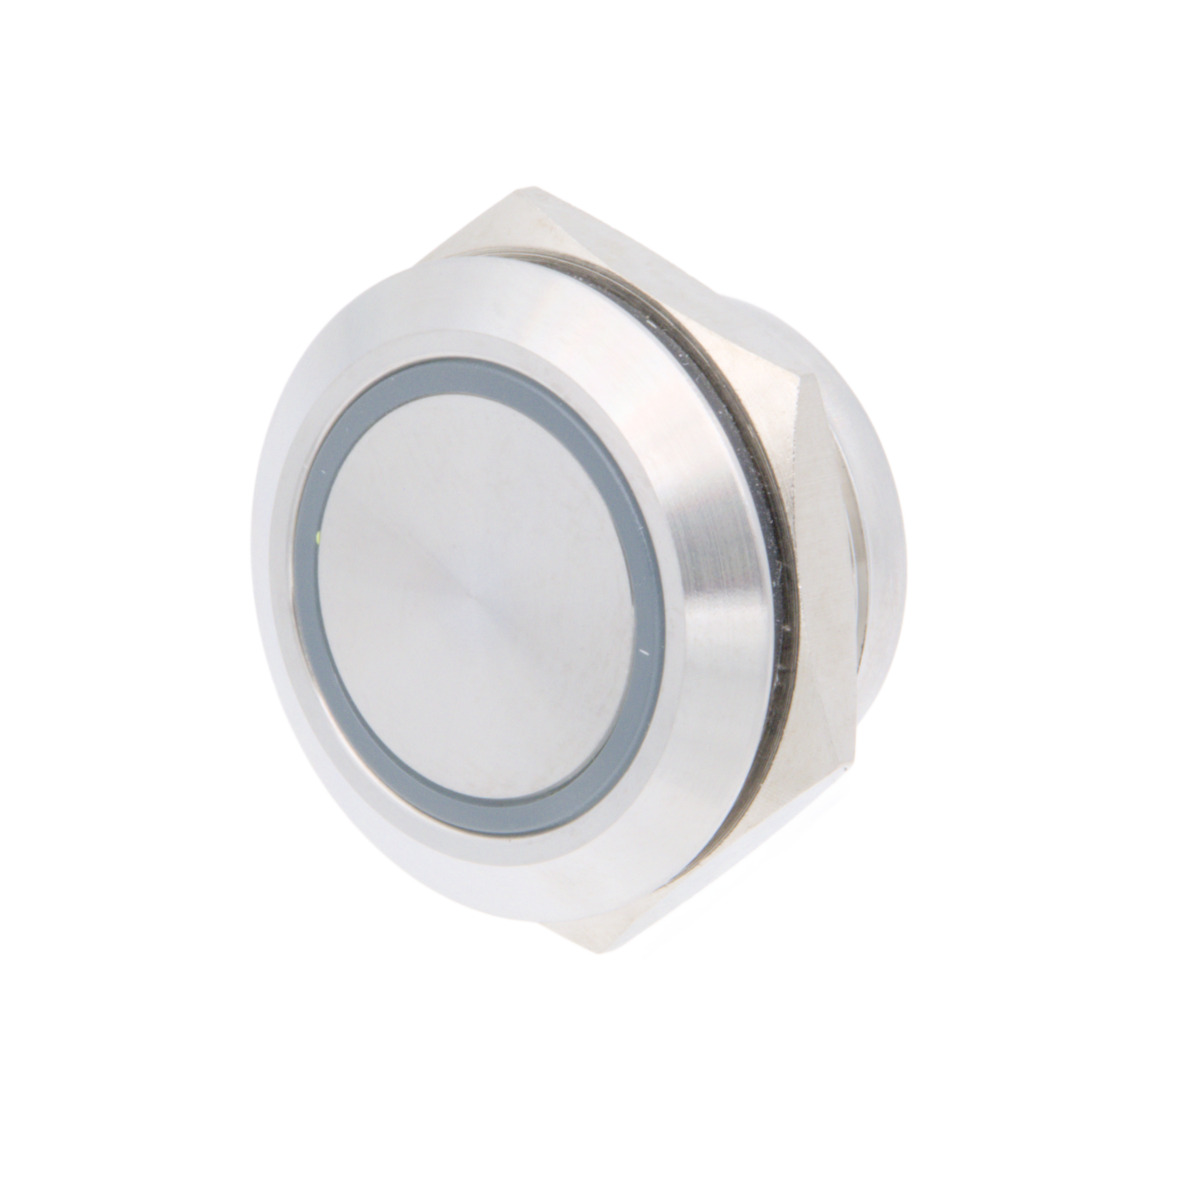 Ø19mm Metal Push Button with Red LED - 12V, JST-PHR-4 Connection